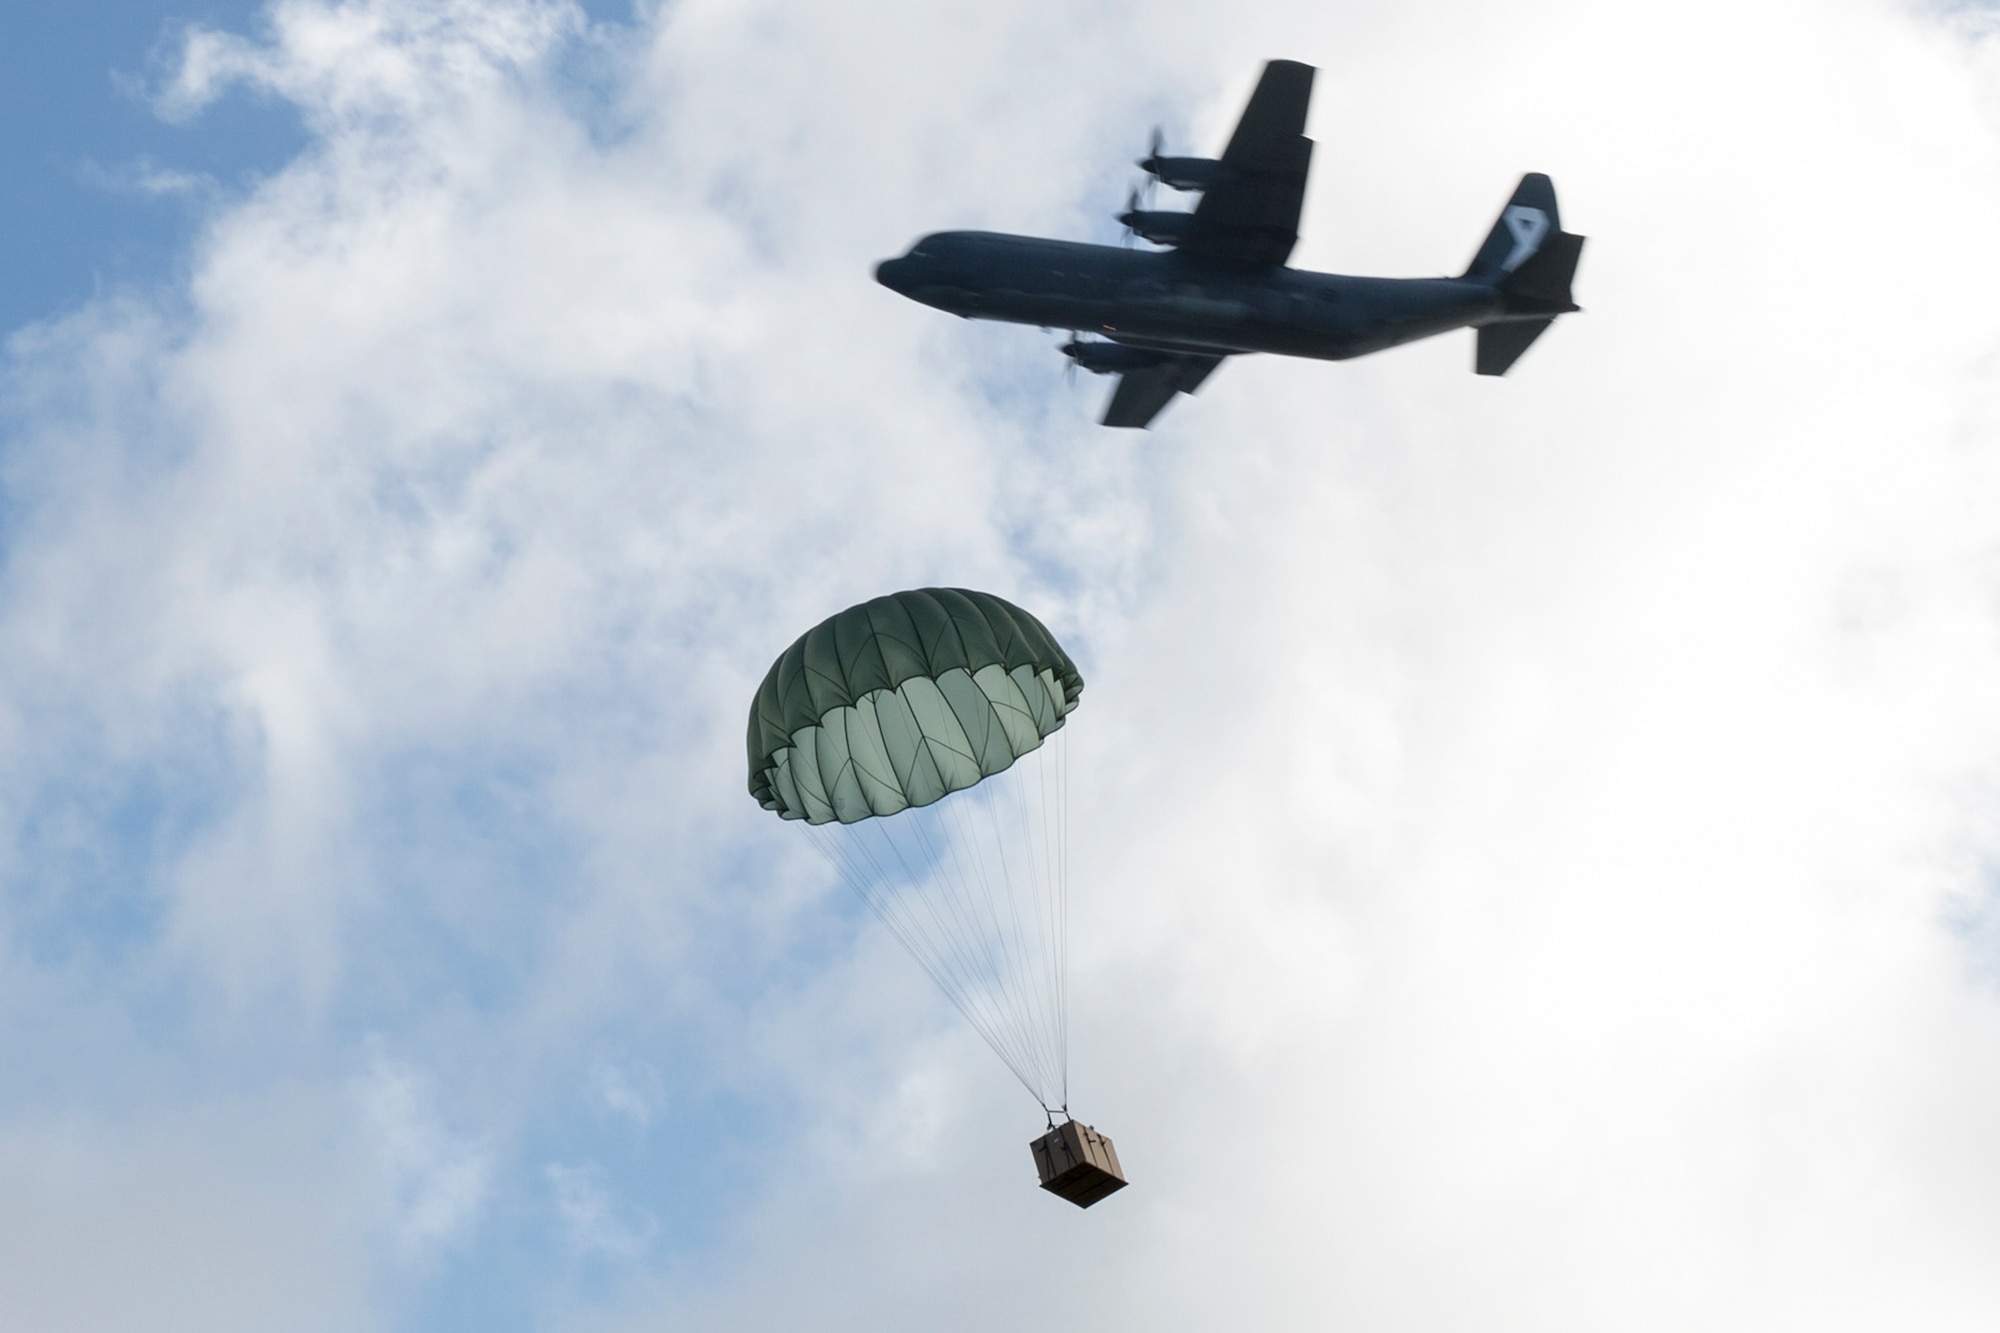 Royal Australian Air Force C-130J aircrew observe a U.S. Air Force C-130H low-cost, low-cost altitude bundle drop to Fais Island, Federated States of Micronesia, Dec. 8, 2015, during Operation Christmas Drop 2015. Airmen delivered over 800 pounds of supplies to the island of Fais during the drop. This year marks the first trilateral Operation Christmas Drop where the U.S. Air Force, Japan Air Self-Defense Force and RAAF work together to provide critical supplies to 56 Micronesian islands impacting 20,000 islanders. (U.S. Air Force photo by Osakabe Yasuo/Released)